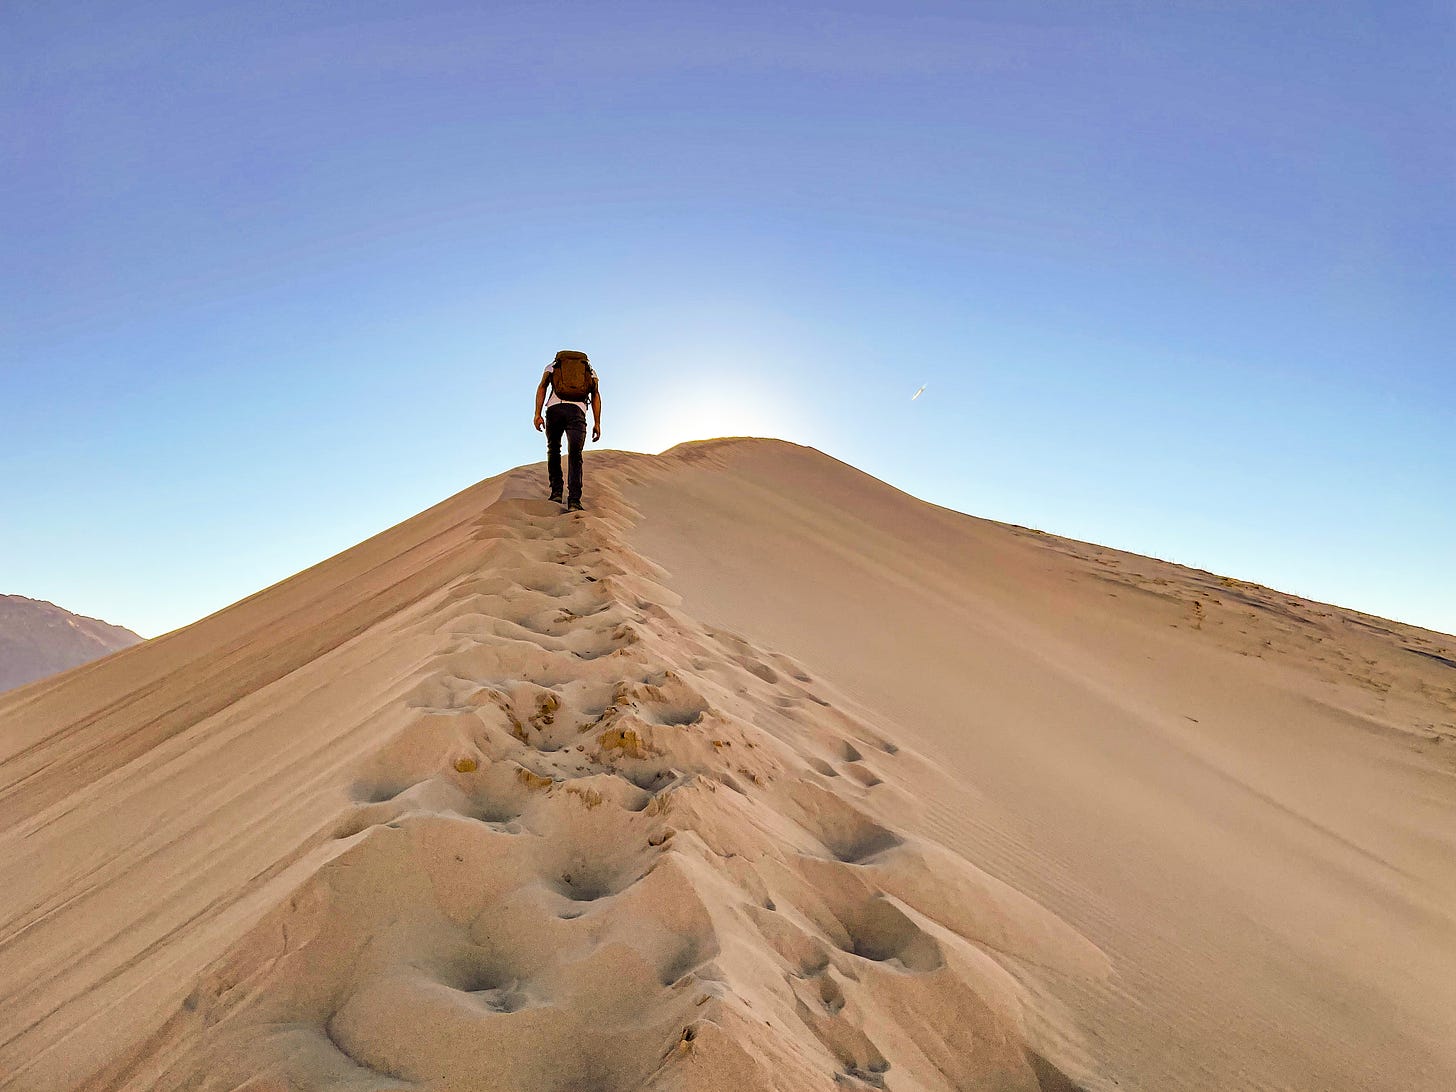 A man hikes up a sand dune that rises so high it blocks out the sun on a cloudless day.